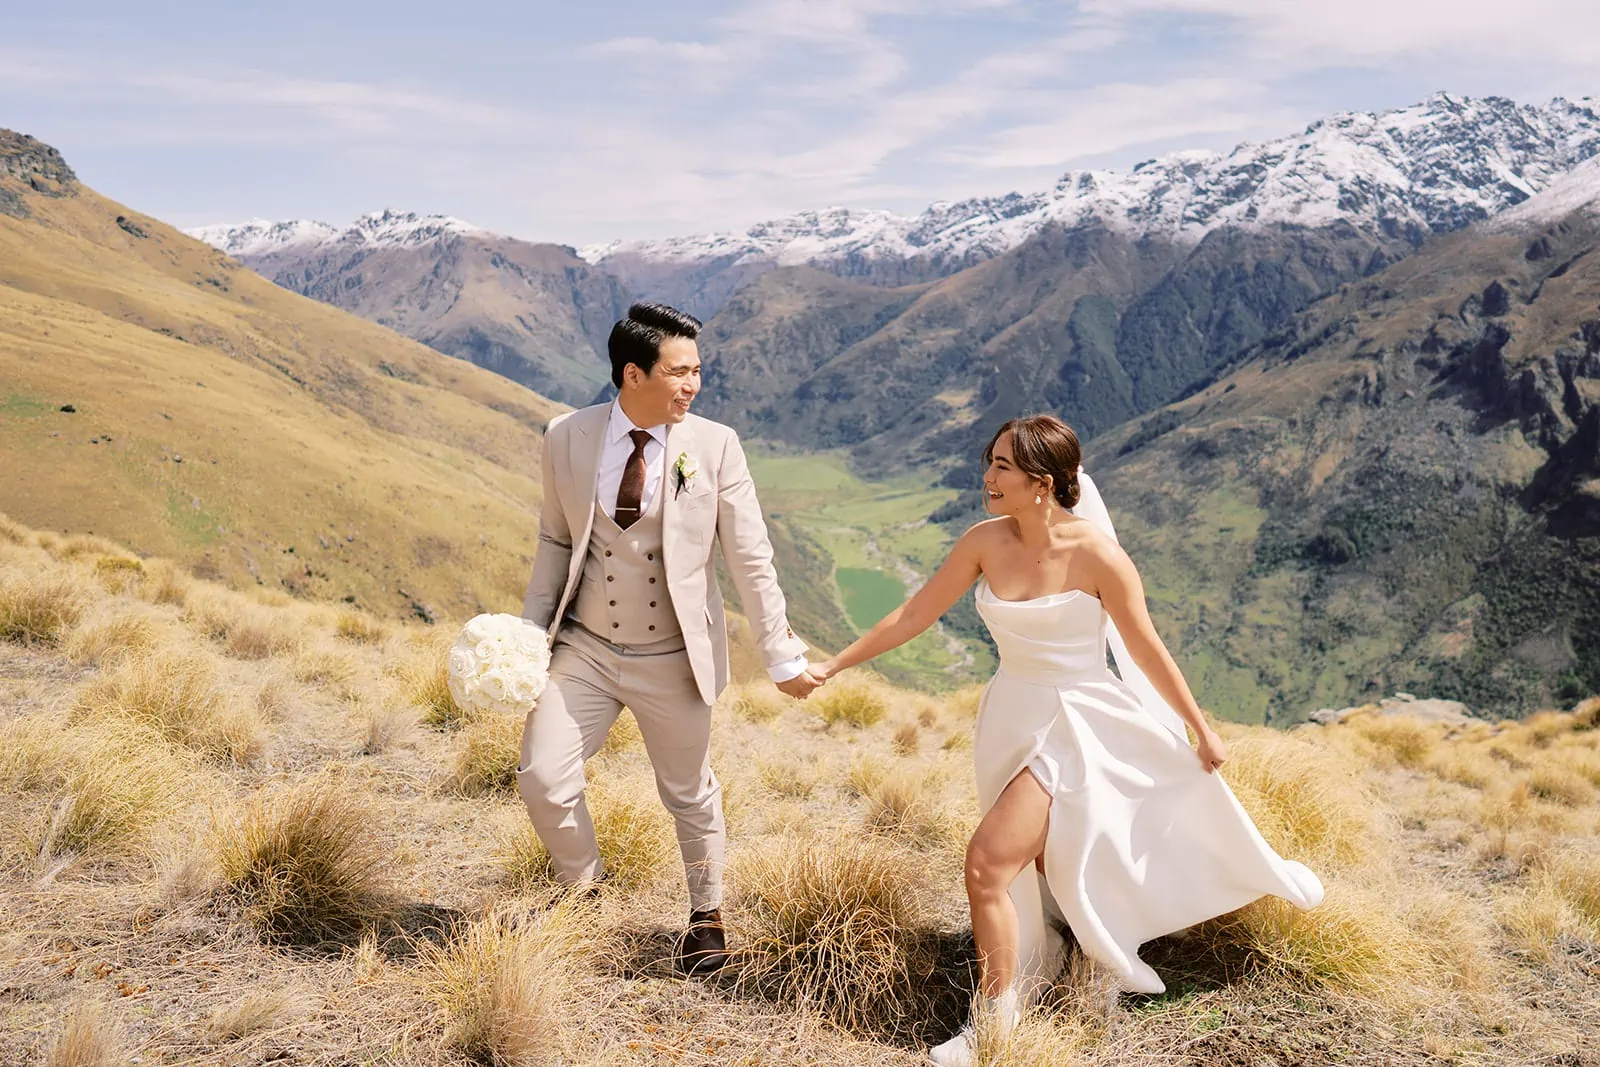 Queenstown Elopement Heli Wedding Photographer クイーンズタウン結婚式 | A Queenstown wedding couple, Tobi and Ceidi, strolling through a picturesque grassy field with majestic mountains as their backdrop.